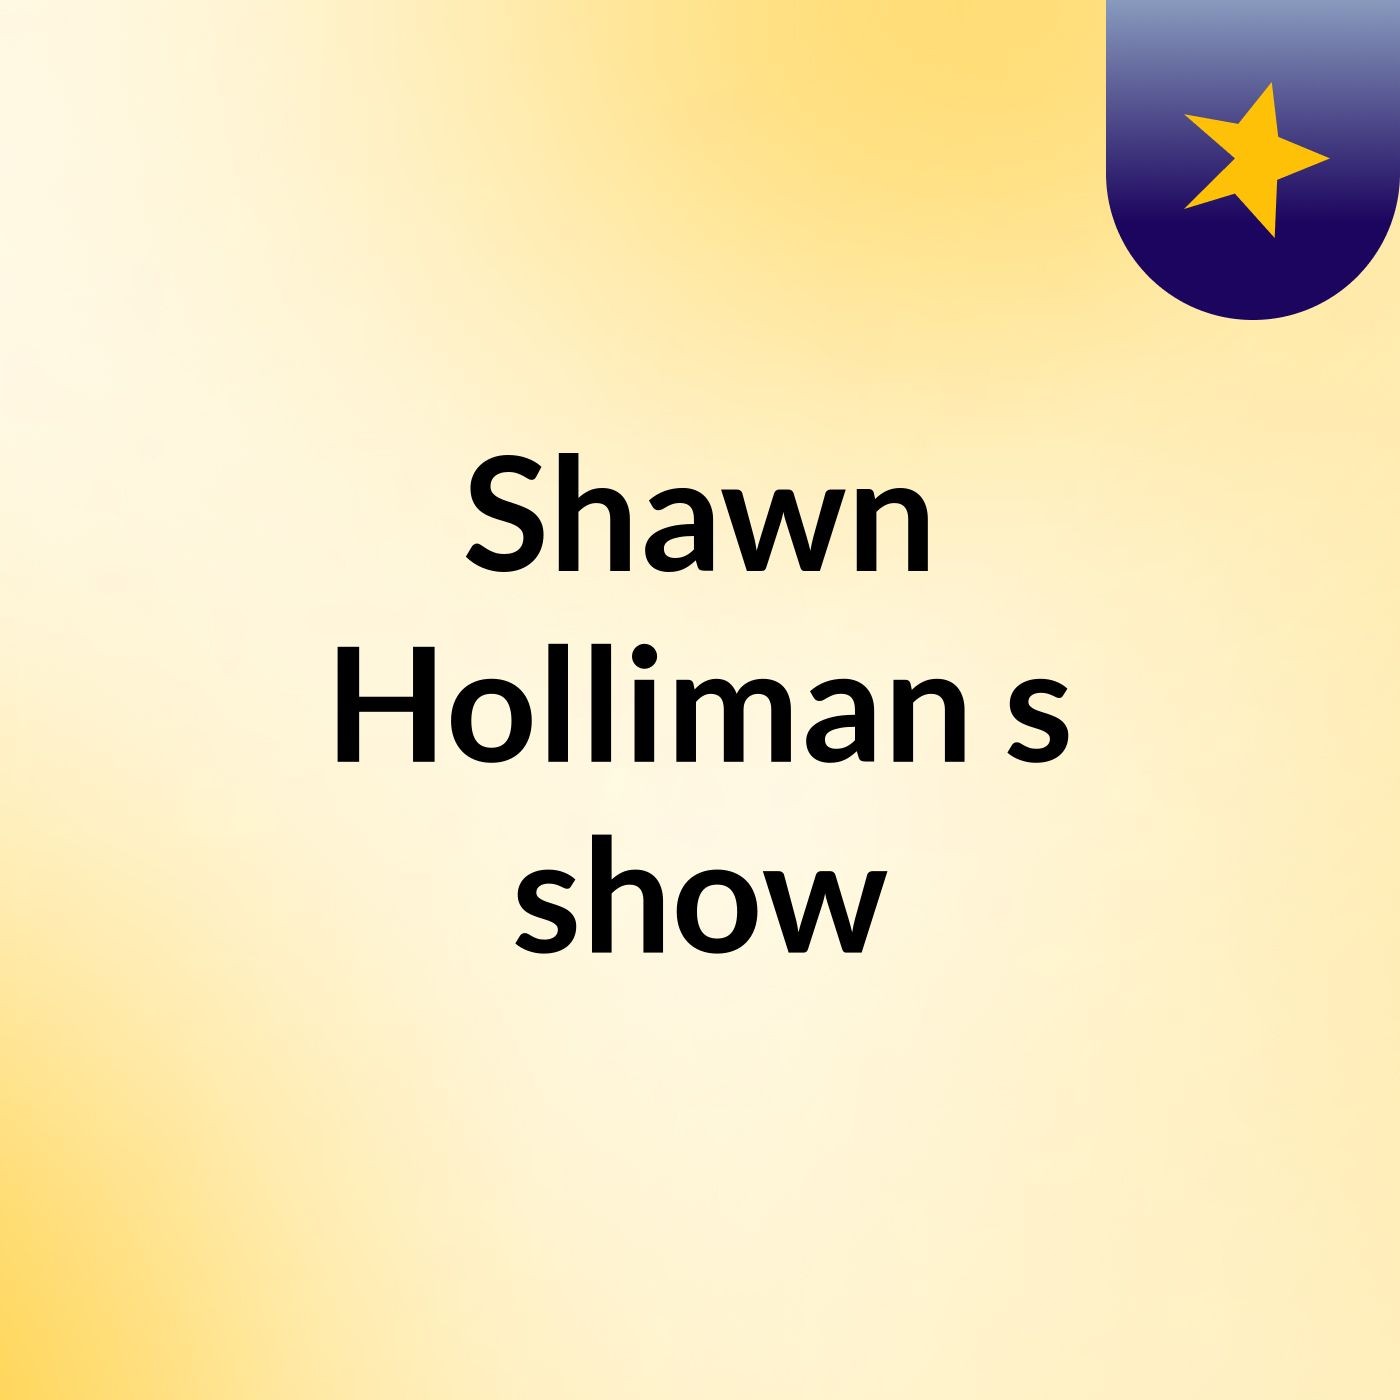 Episode 3 - Shawn Holliman's show